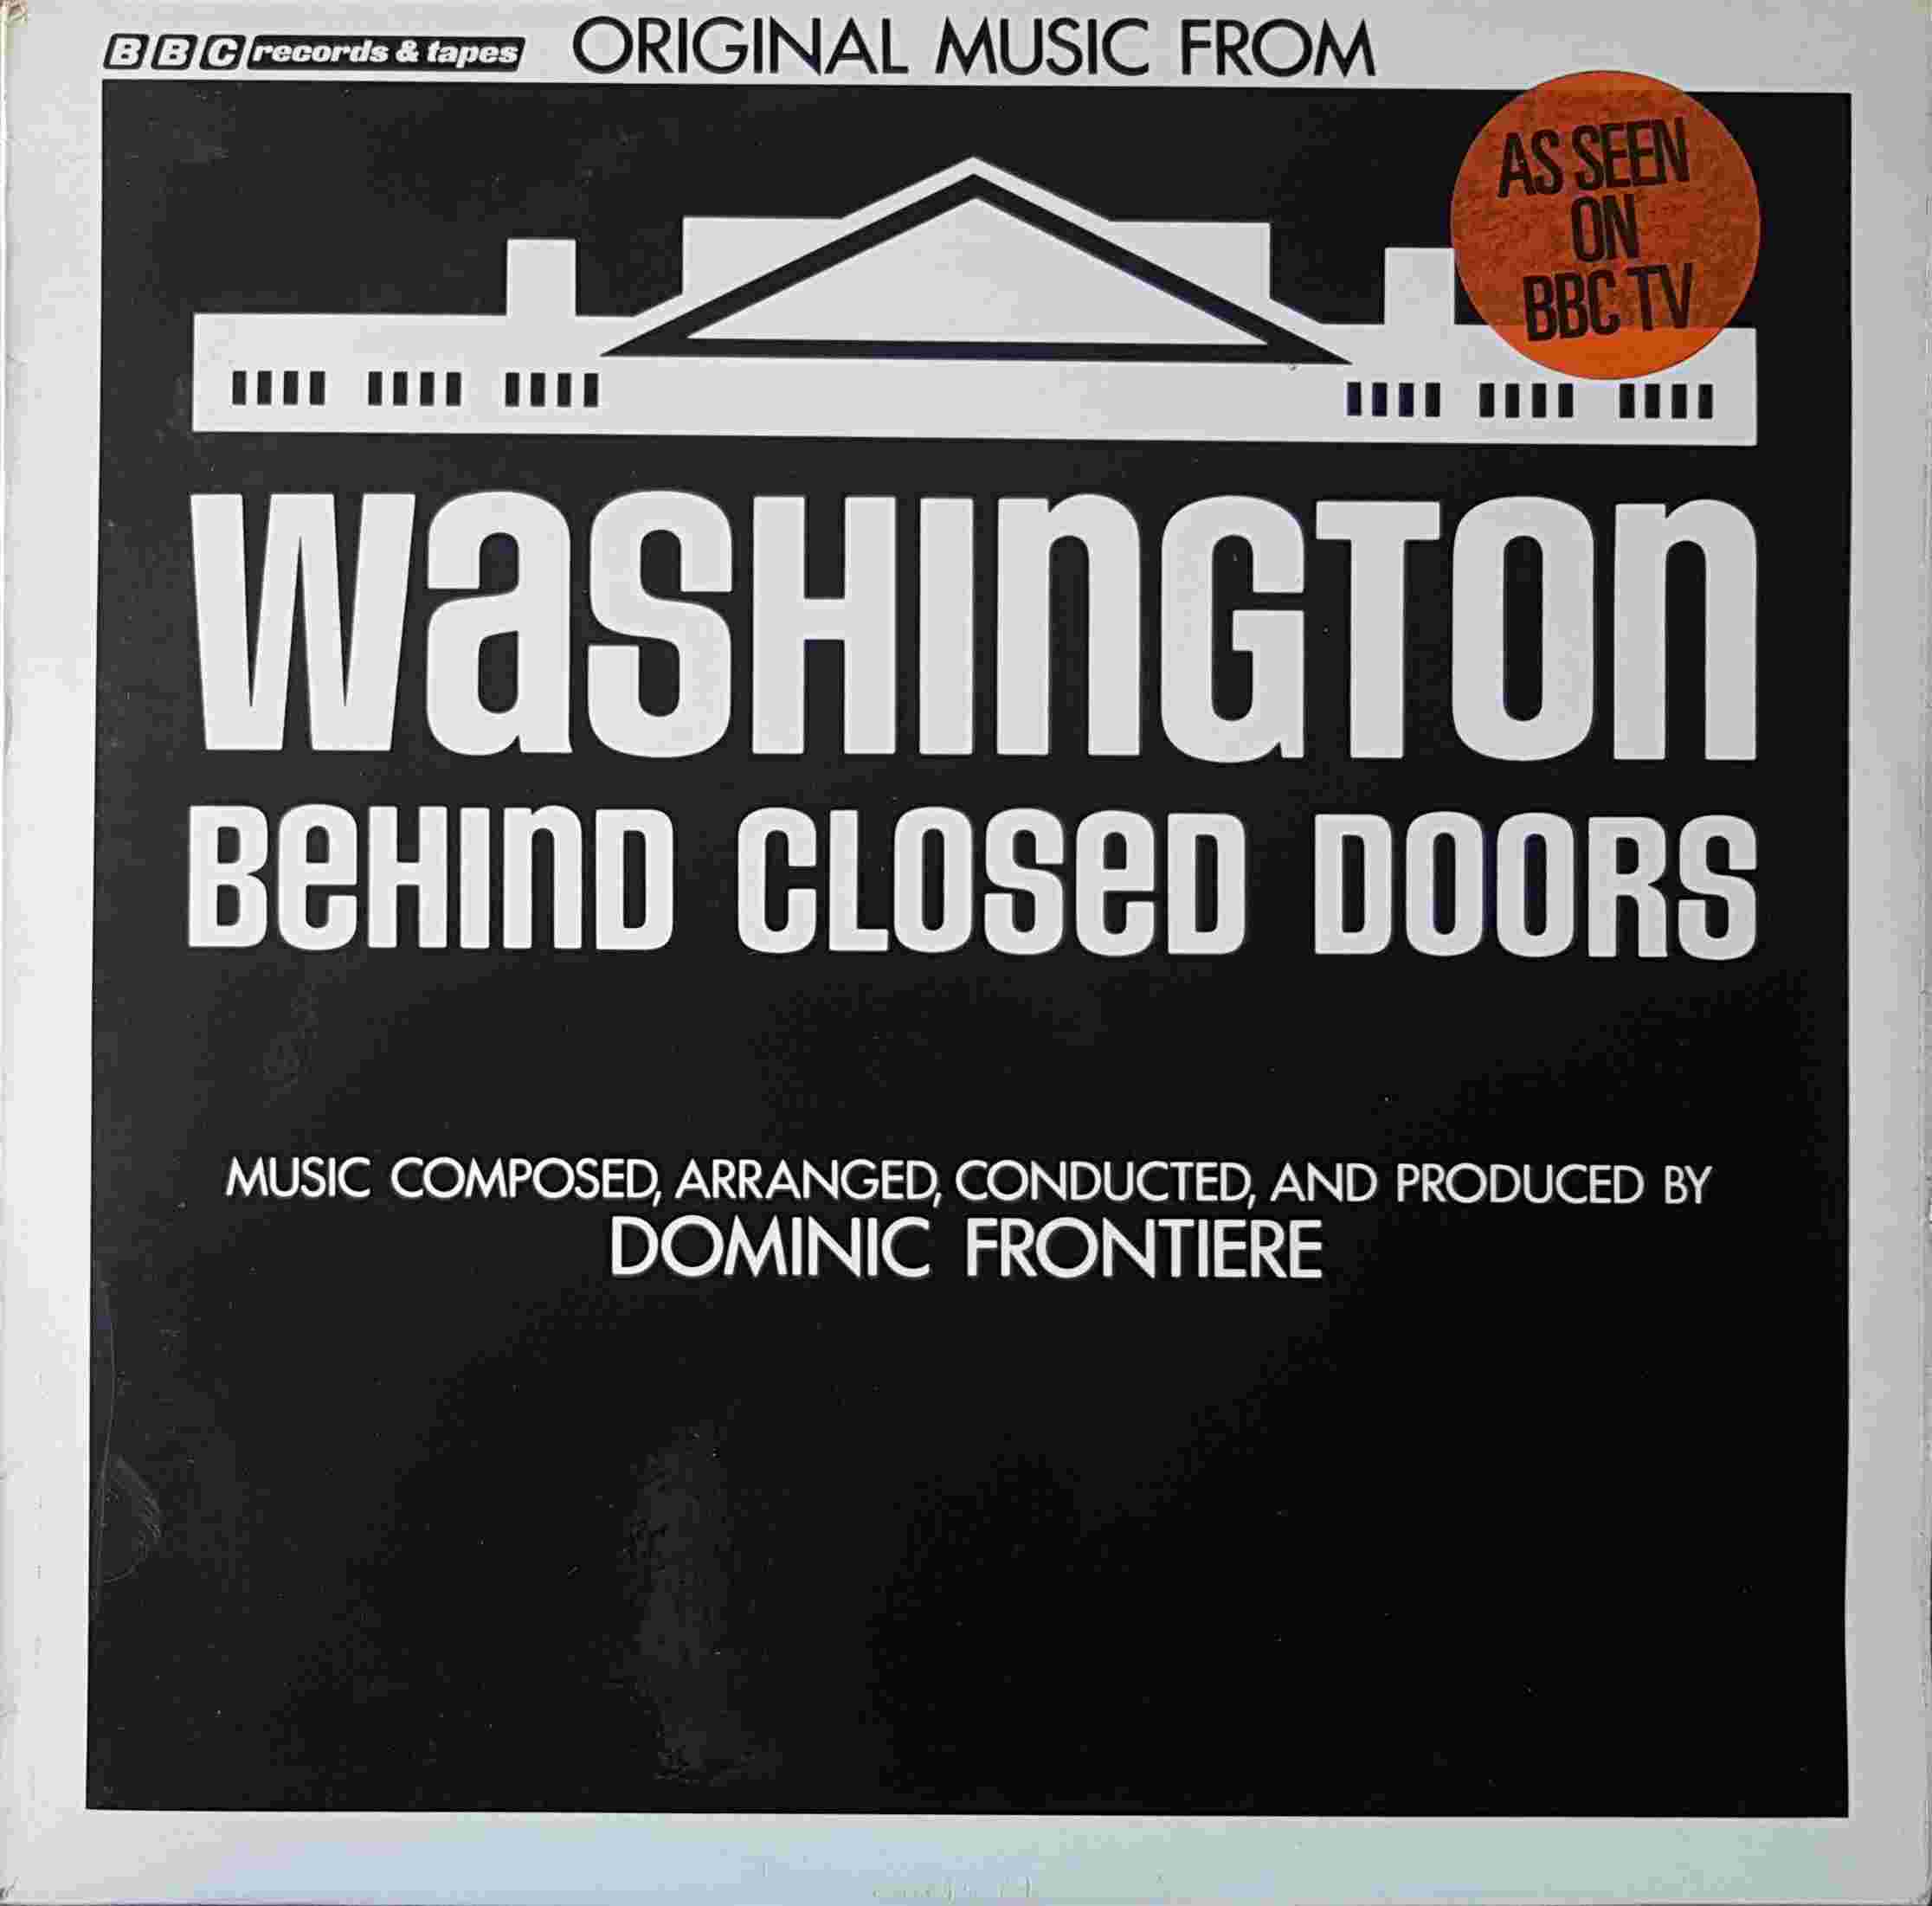 Picture of REB 327 Washington behind closed doors by artist Dominic Frontiere from the BBC albums - Records and Tapes library